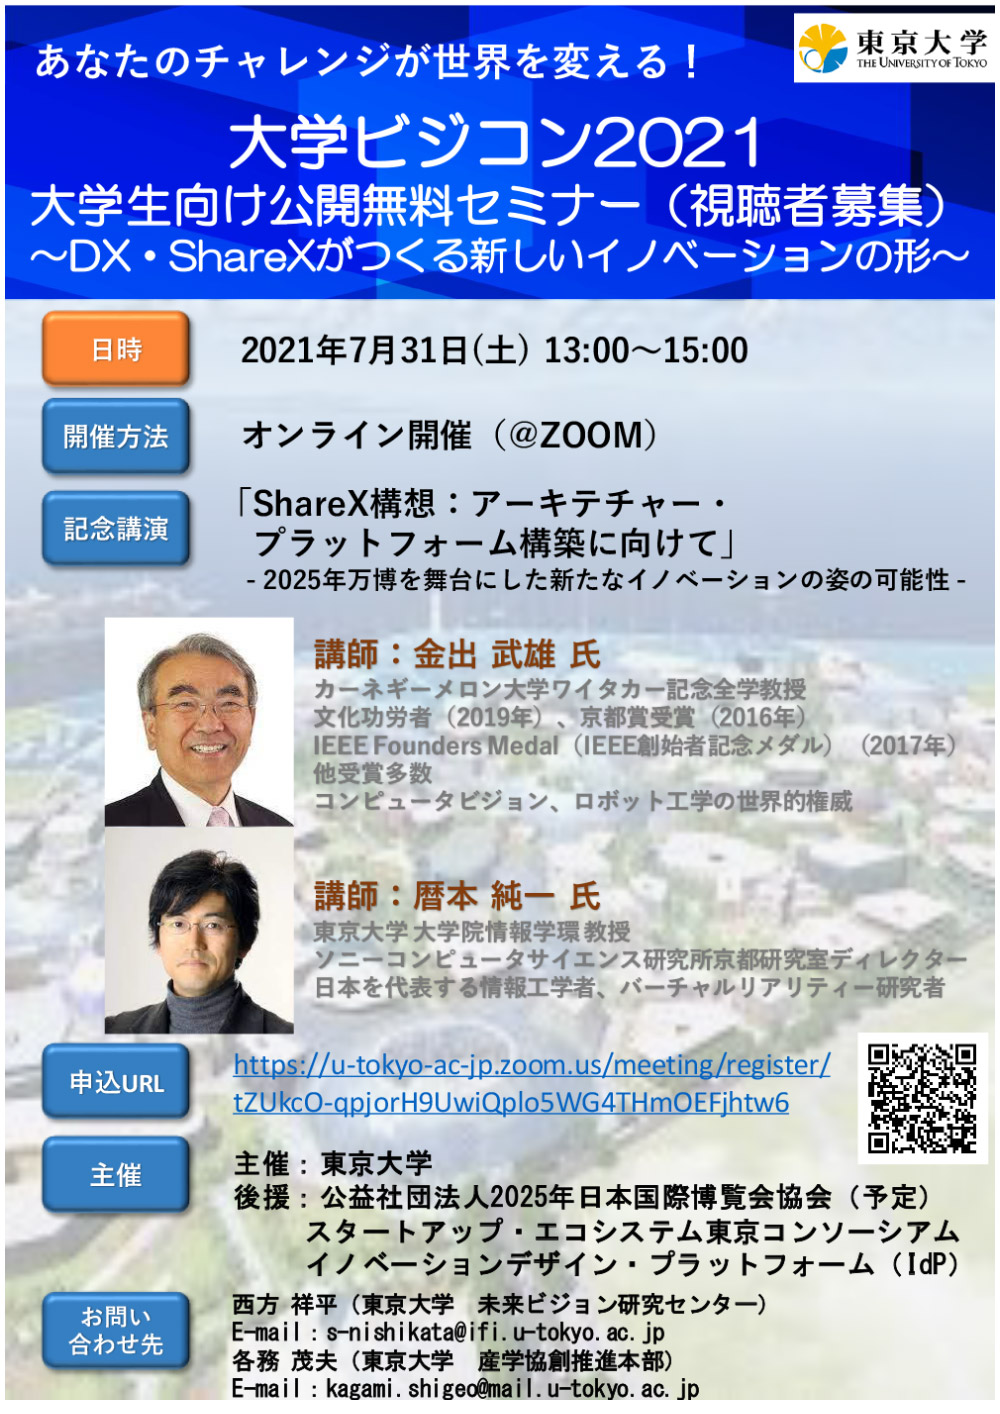 University VISICON 2021 Free Open Seminar for University Students<br> ～ New forms of innovation created by DX and ShareX